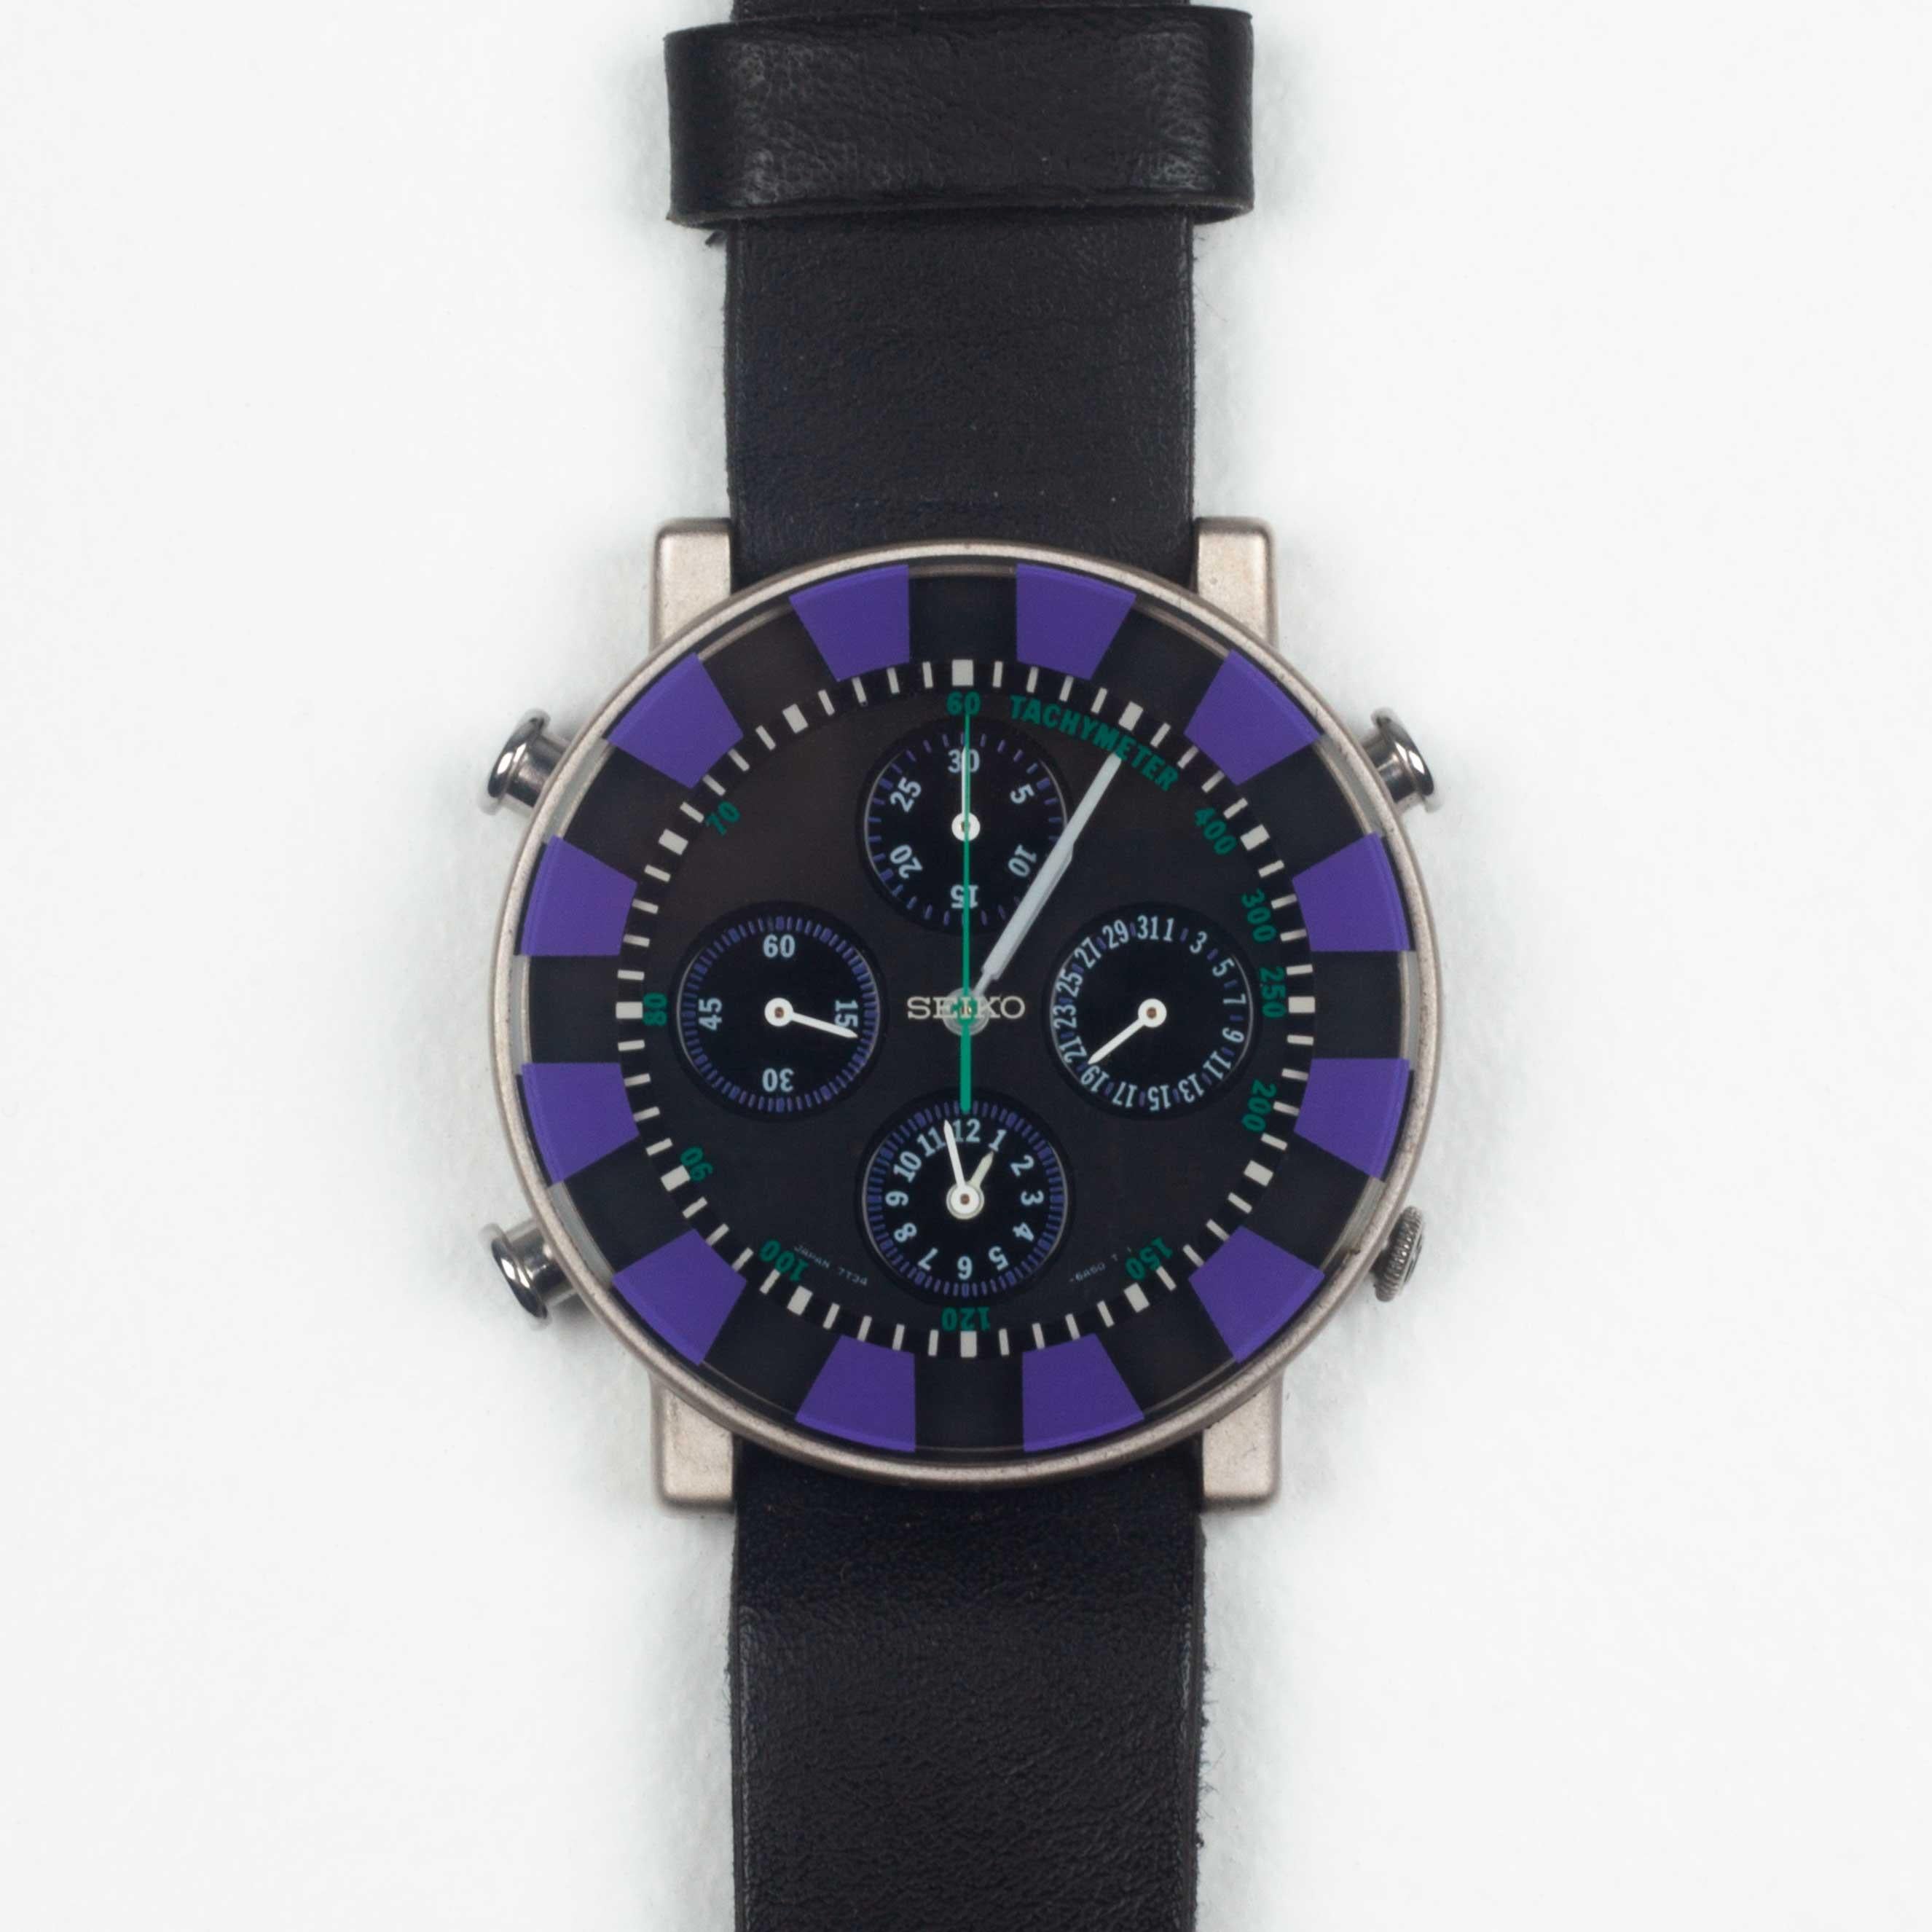 First edition, out-of-production SOTTSASS COLLECTION wrist watches designed by Ettore Sottsass, released in Japan by Seiko in 1992. Purple, black and white face. Teal second hand and tachymeter numbers, white minute and hour hands. A floating effect